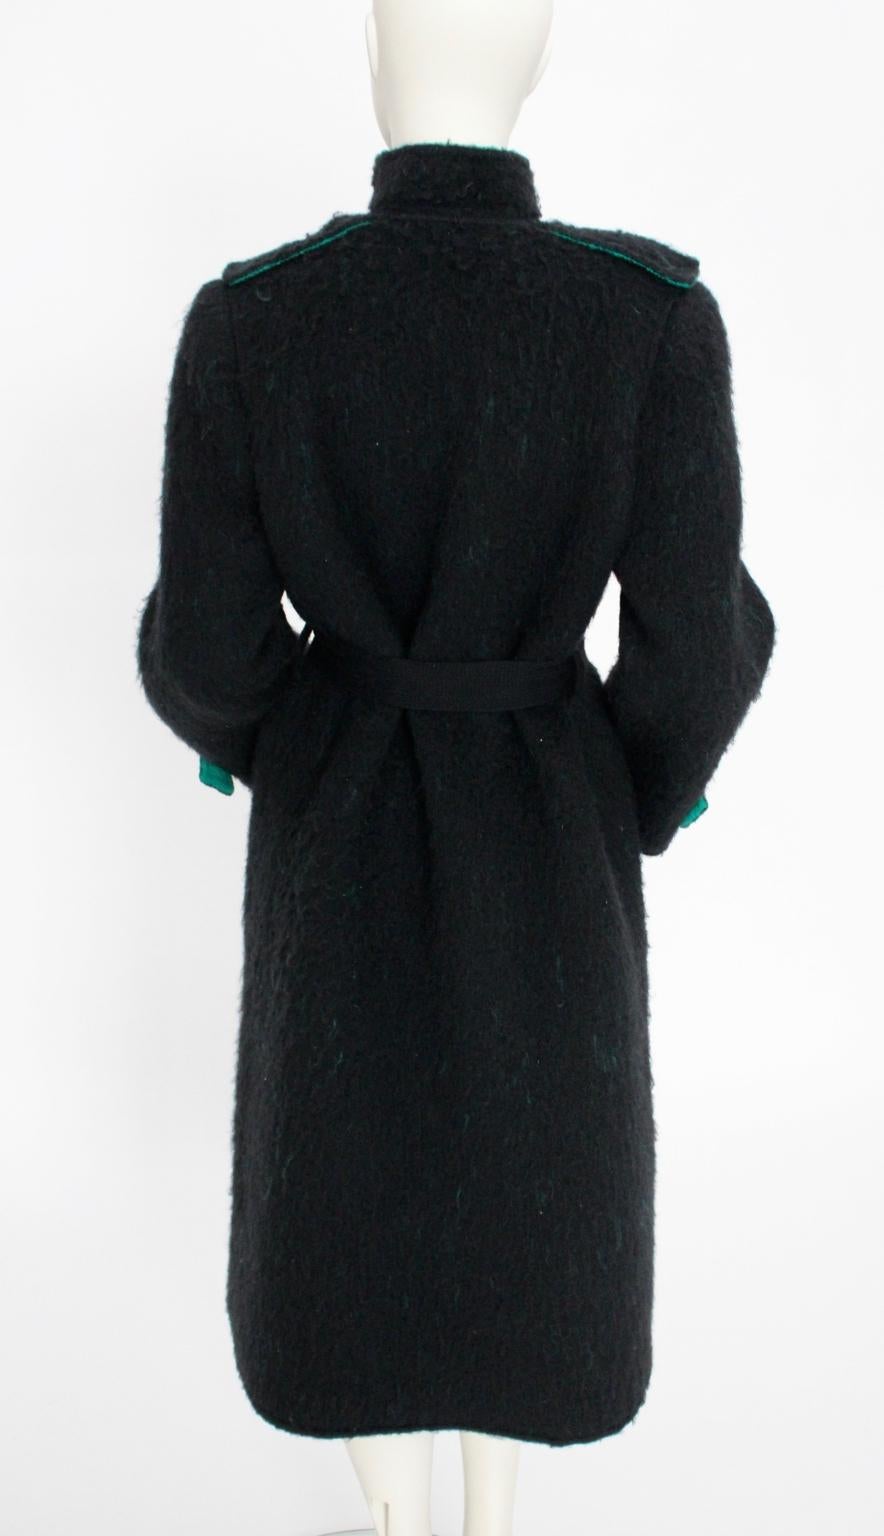 Lancetti Roma Vintage Black and Green Wool Coat 1970s For Sale 1